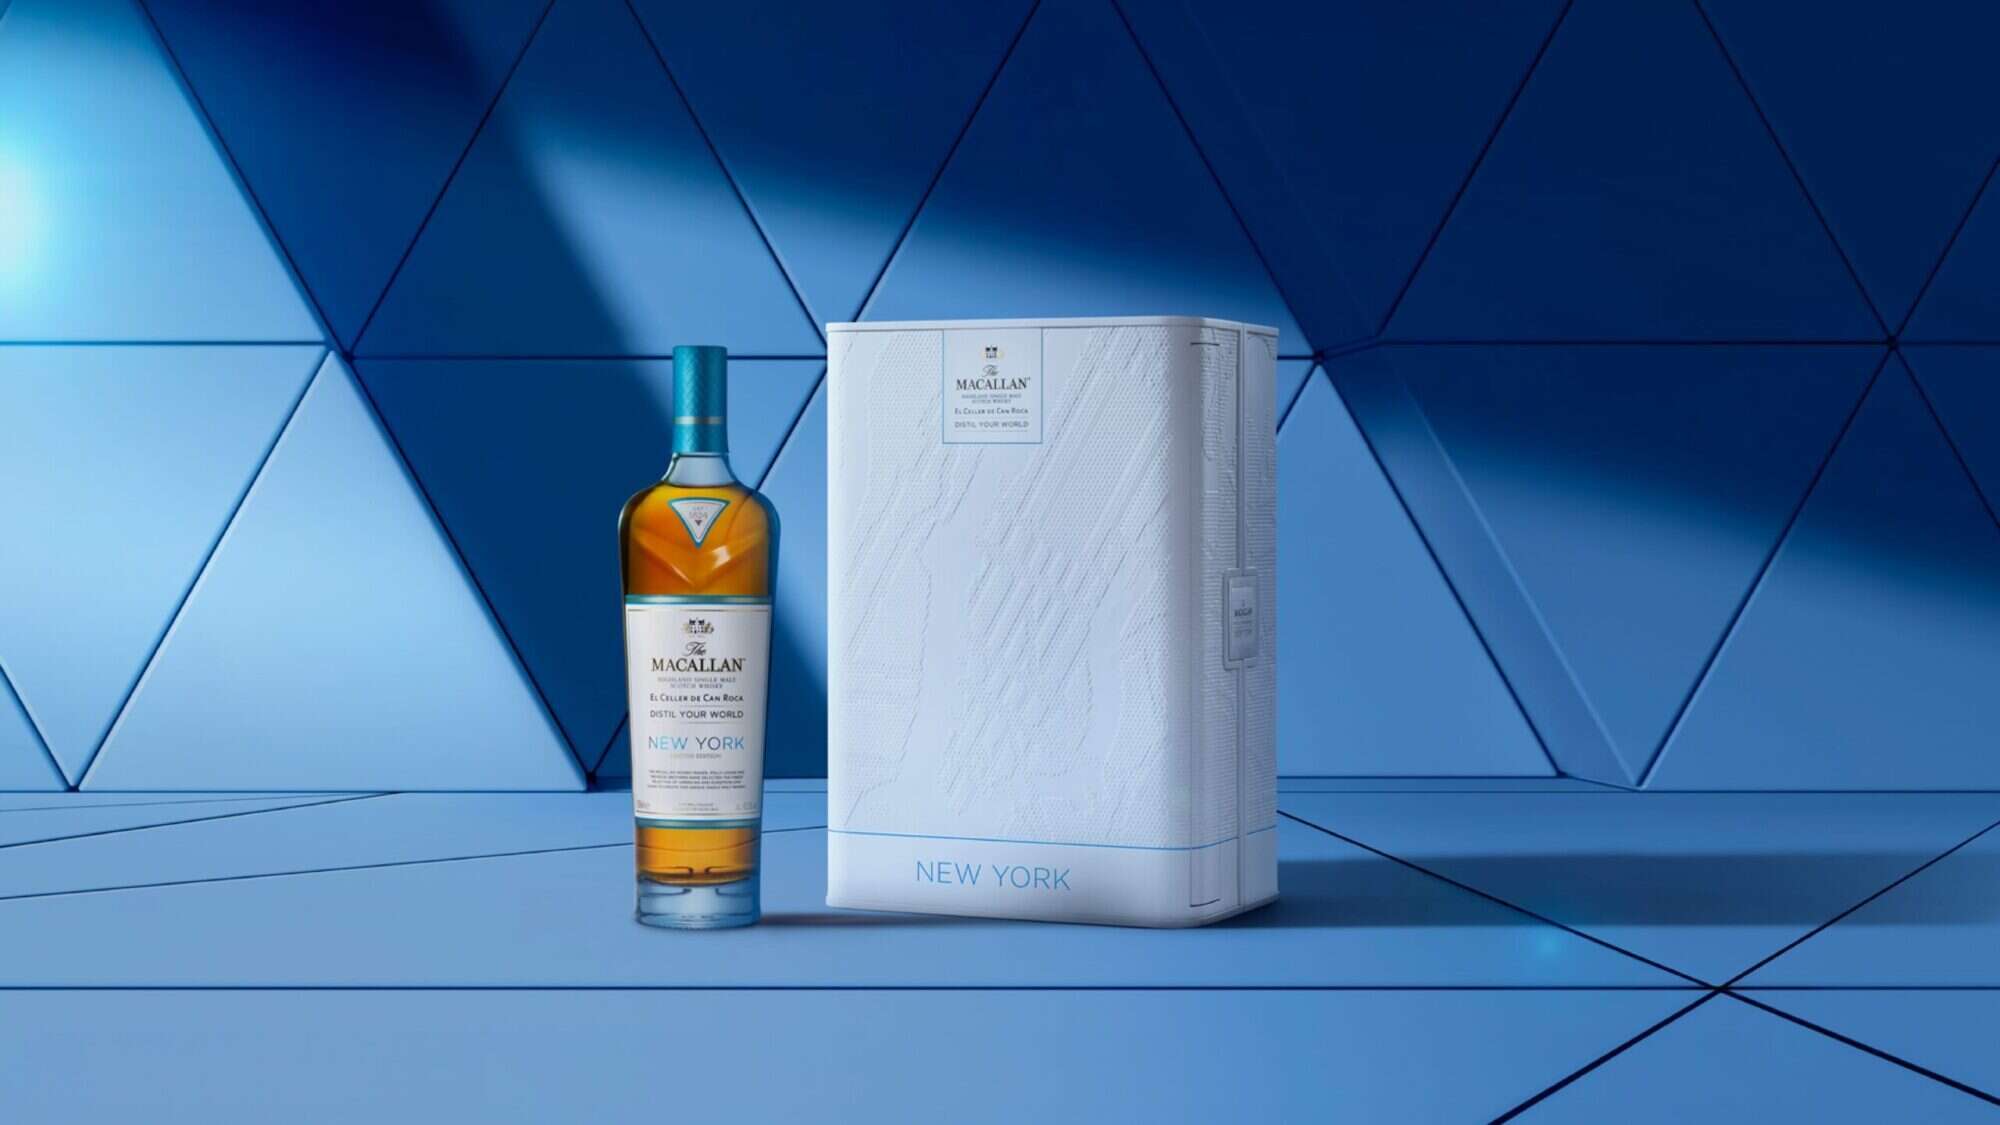 The Macallan Celebrates New York in Latest Whisky Release